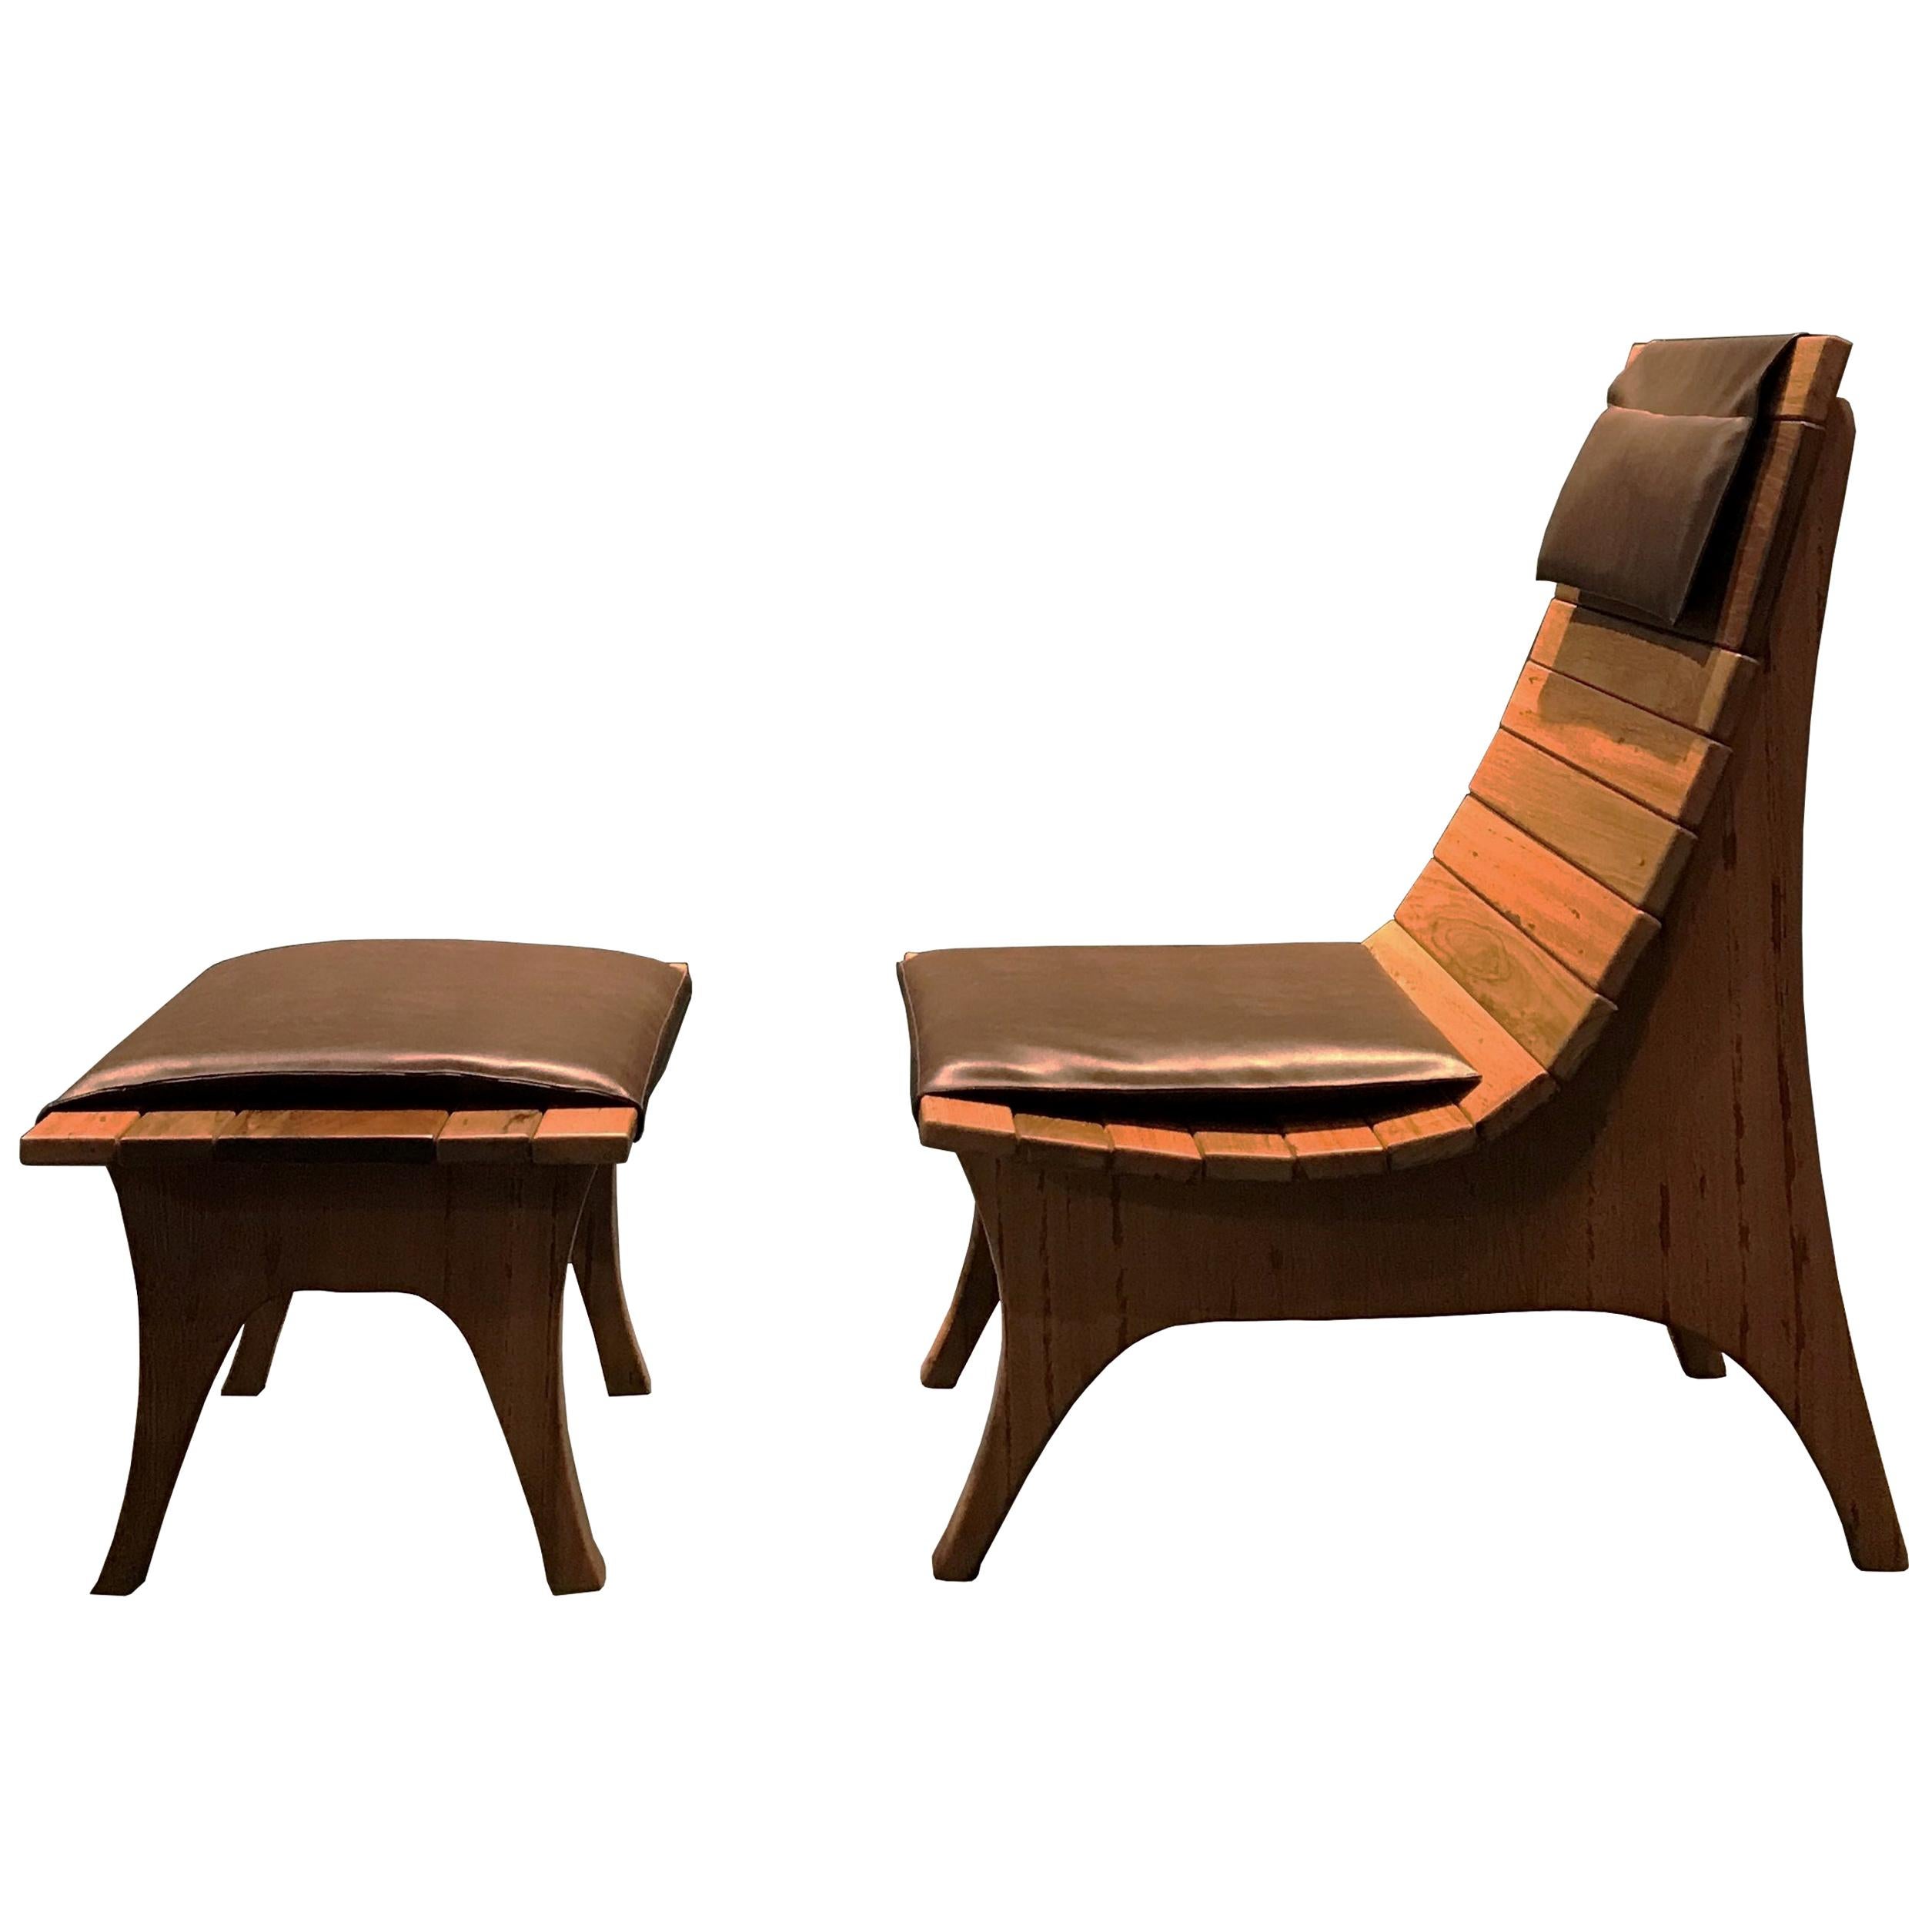 "Tapajós" Armchair with Ottoman in Amazonian Rare Wood and Eco Leather